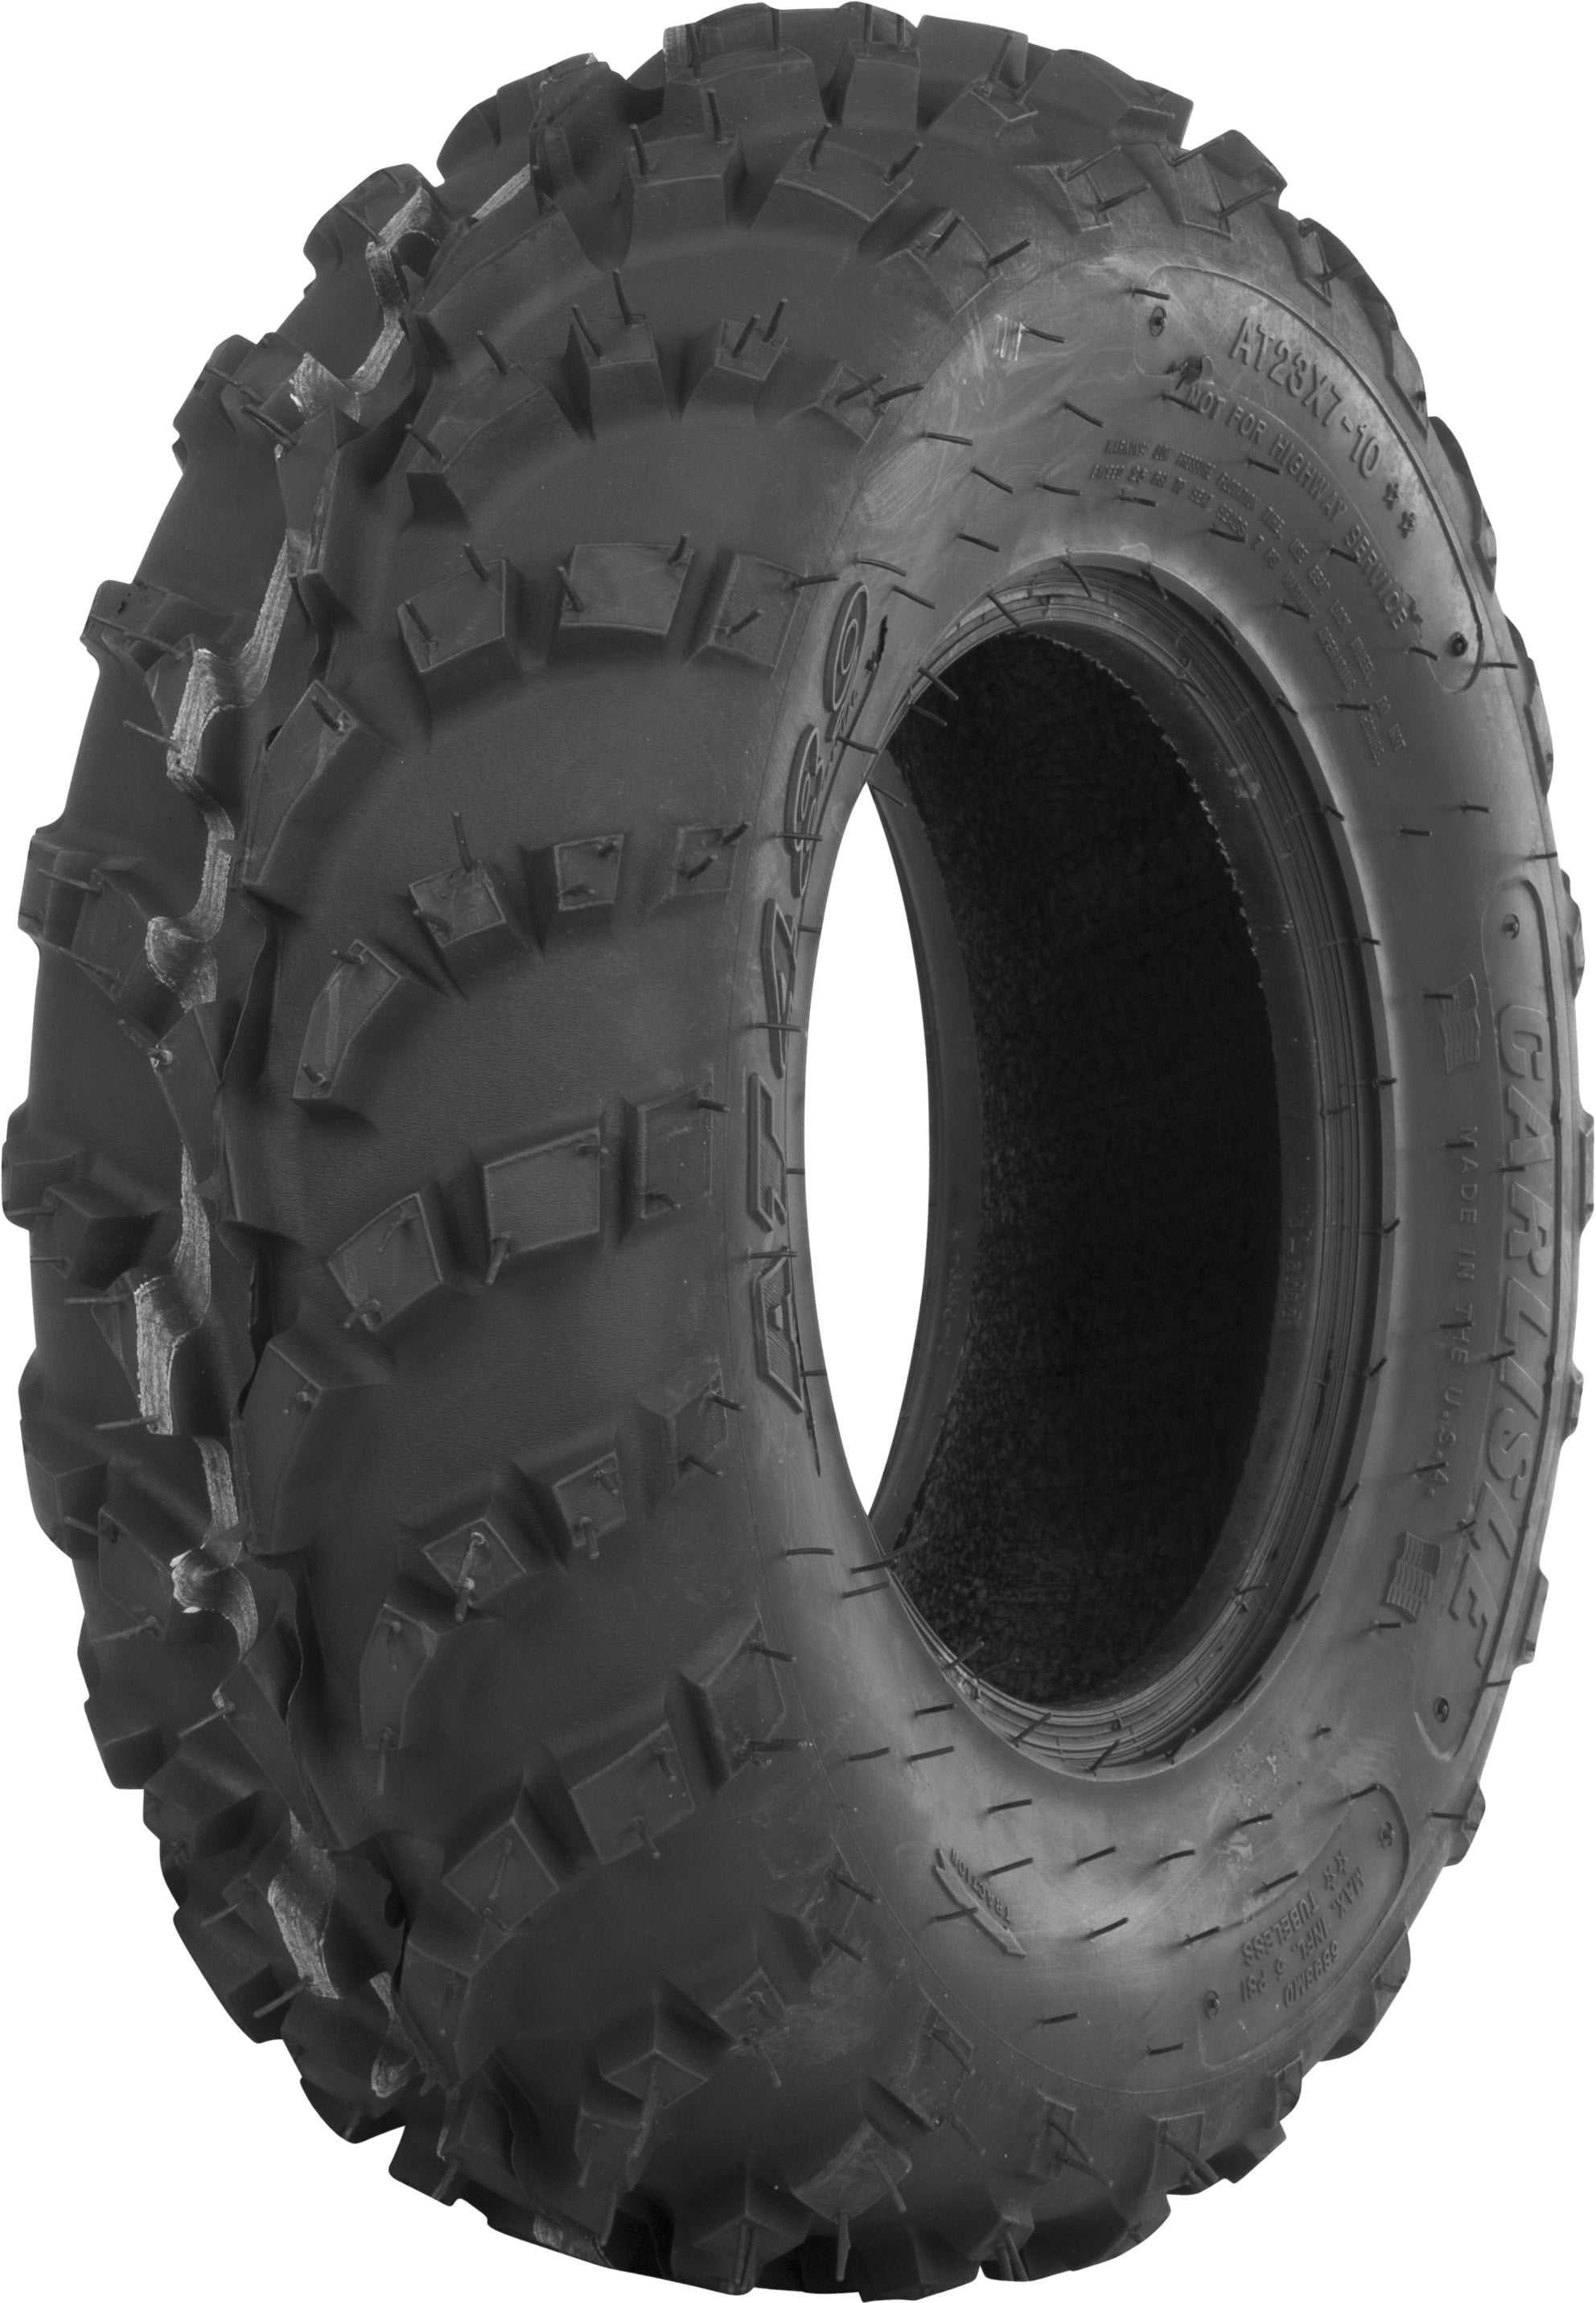 Tire At489 Front 23x8 11 Bias